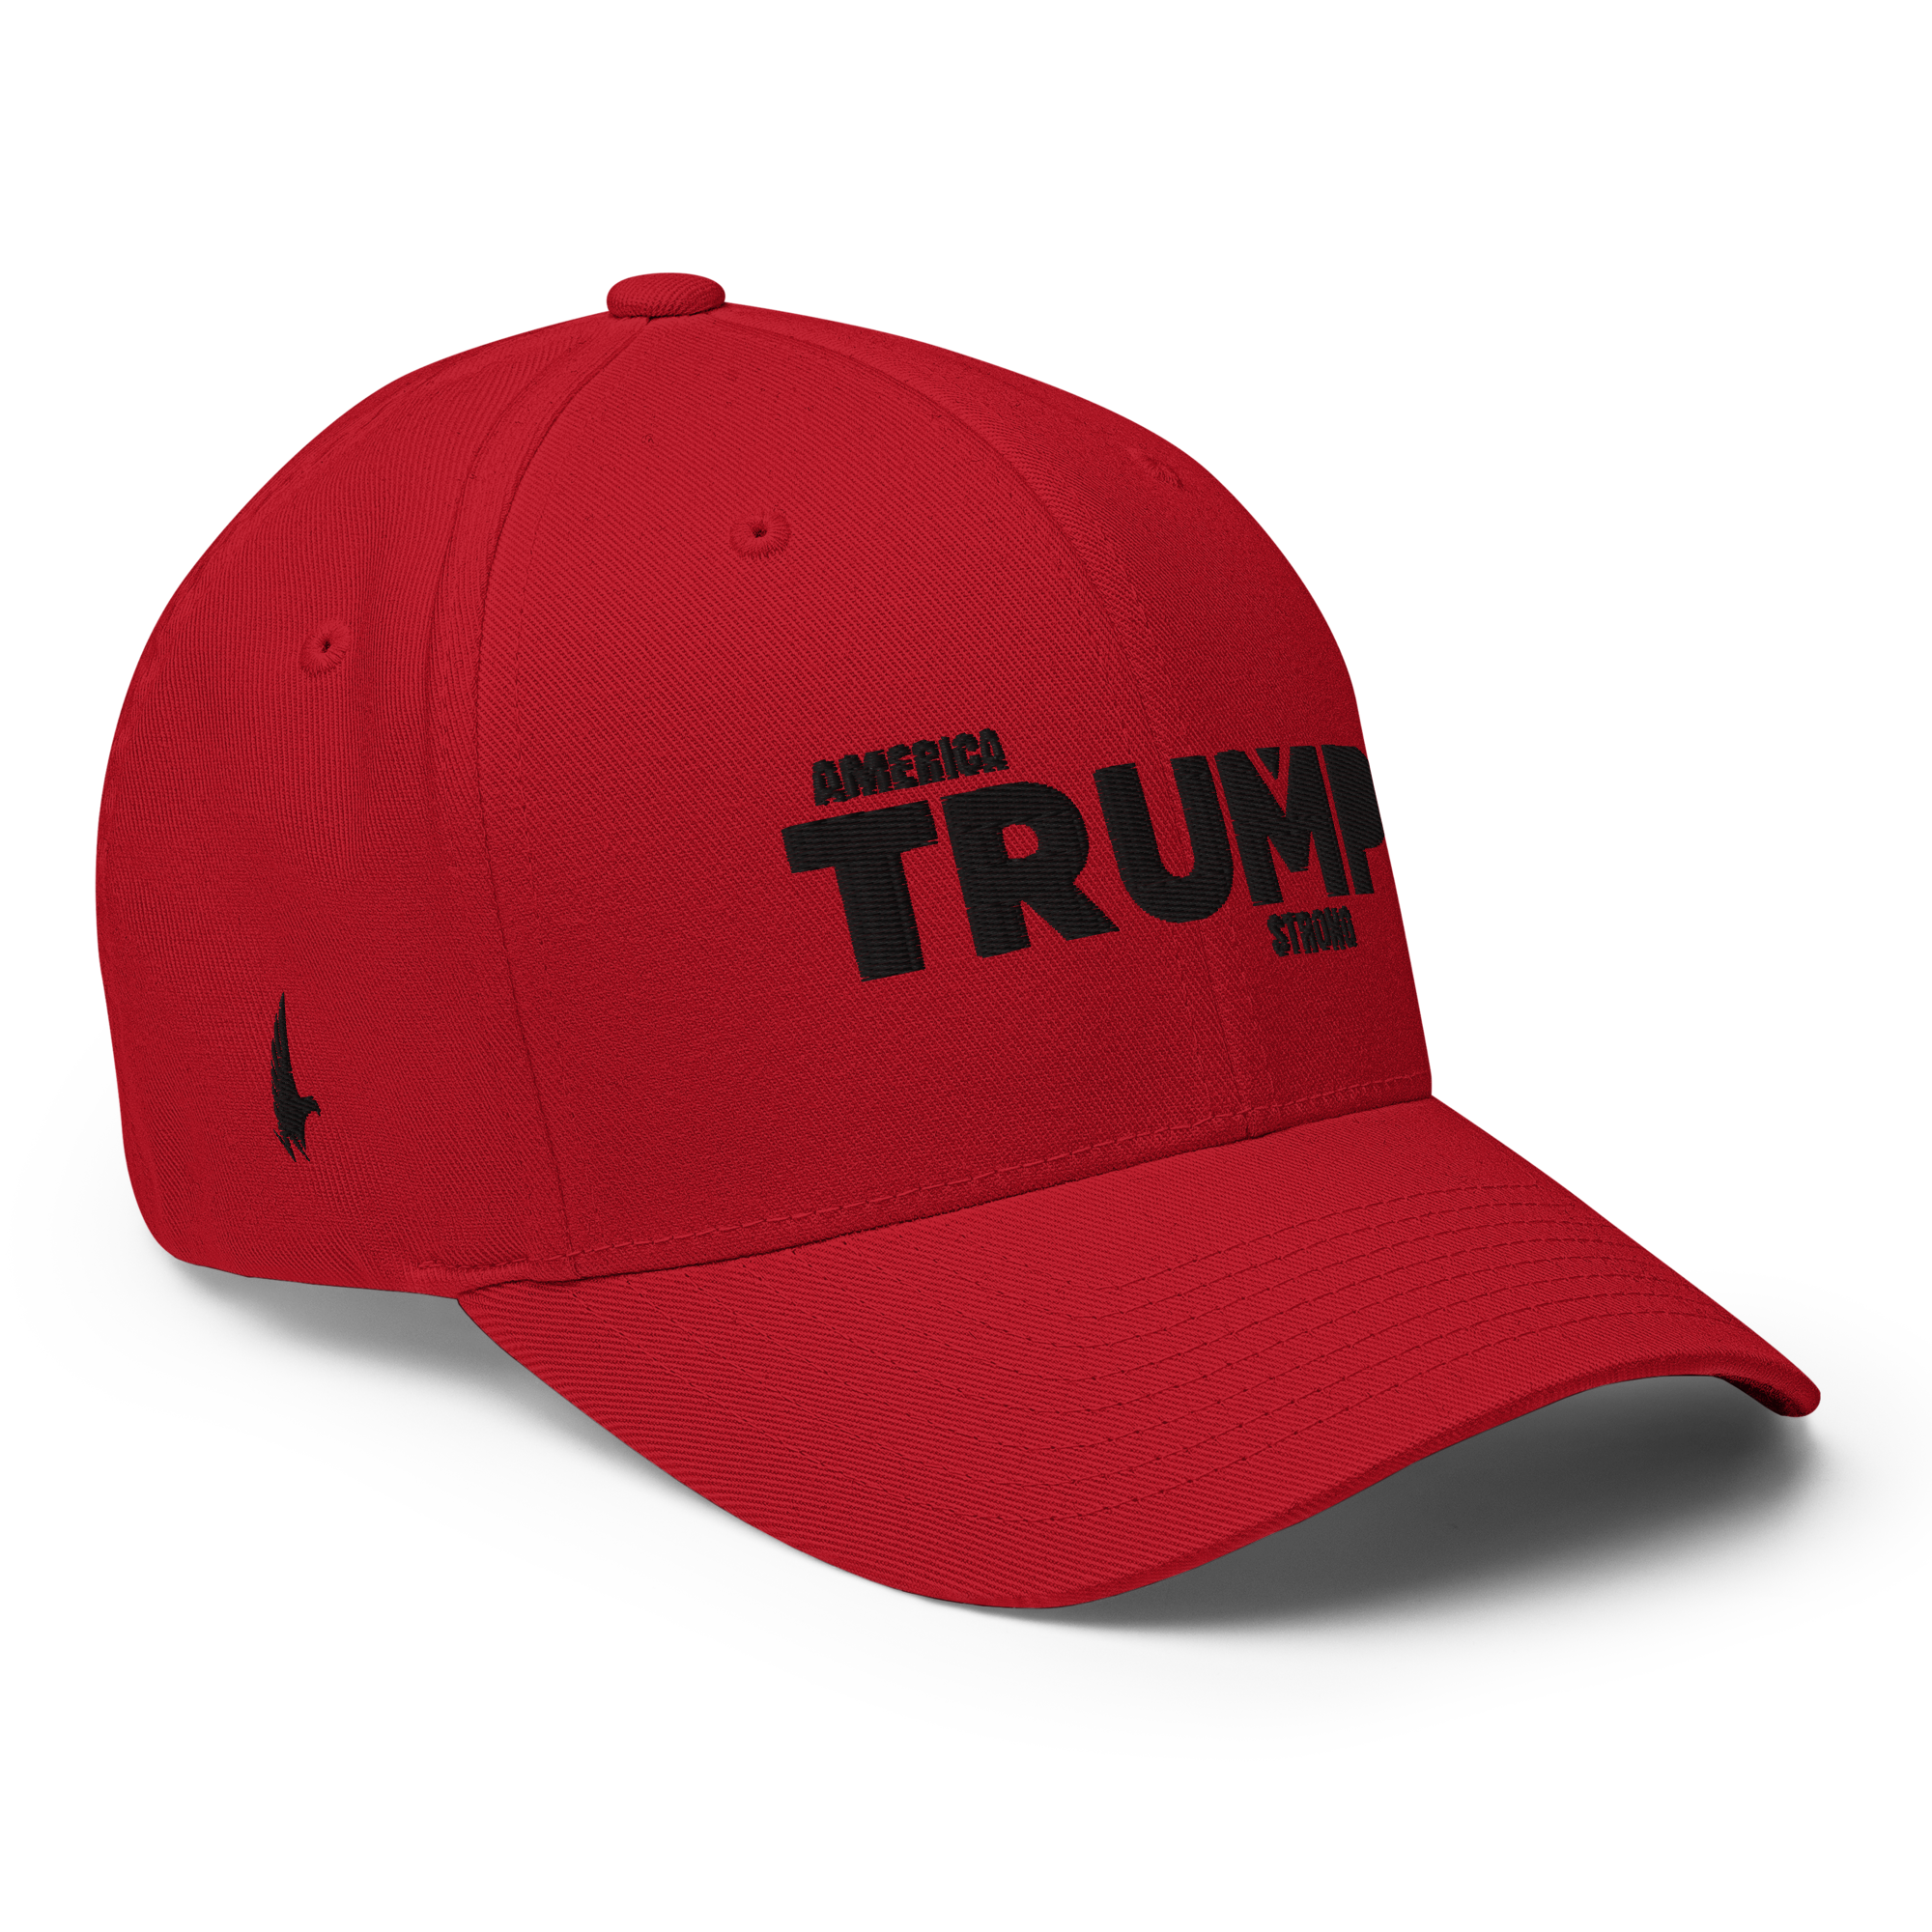 America Strong Trump Flexfit Hat - Red /Black Fitted - Loyalty Vibes